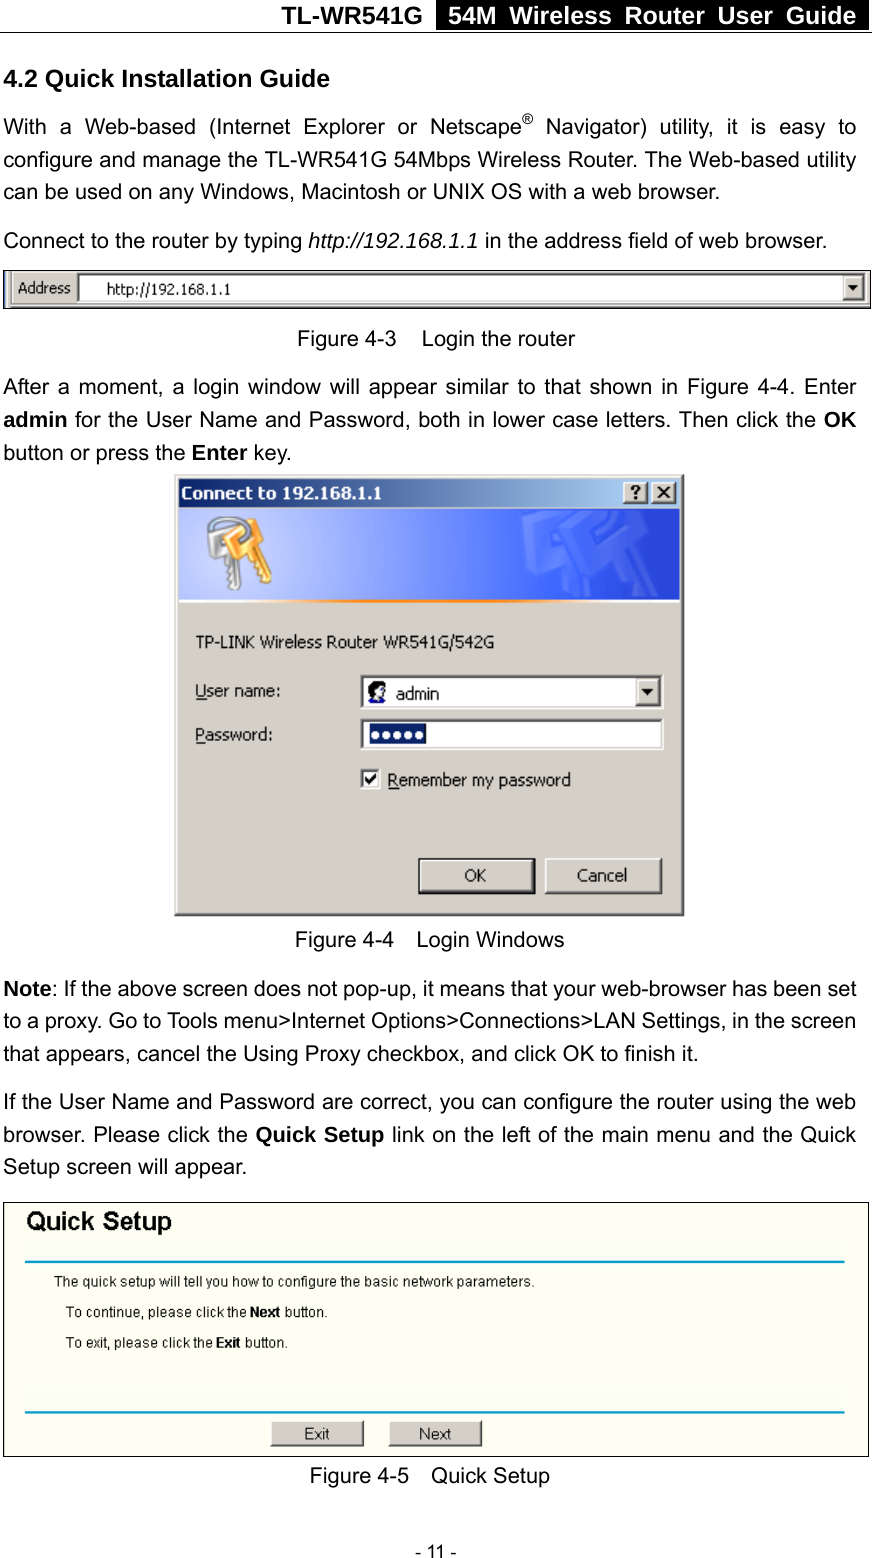 TL-WR541G   54M Wireless Router User Guide  4.2 Quick Installation Guide With a Web-based (Internet Explorer or Netscape® Navigator) utility, it is easy to configure and manage the TL-WR541G 54Mbps Wireless Router. The Web-based utility can be used on any Windows, Macintosh or UNIX OS with a web browser. Connect to the router by typing http://192.168.1.1 in the address field of web browser.  Figure 4-3  Login the router After a moment, a login window will appear similar to that shown in Figure 4-4. Enter admin for the User Name and Password, both in lower case letters. Then click the OK button or press the Enter key.  Figure 4-4  Login Windows Note: If the above screen does not pop-up, it means that your web-browser has been set to a proxy. Go to Tools menu&gt;Internet Options&gt;Connections&gt;LAN Settings, in the screen that appears, cancel the Using Proxy checkbox, and click OK to finish it. If the User Name and Password are correct, you can configure the router using the web browser. Please click the Quick Setup link on the left of the main menu and the Quick Setup screen will appear.  Figure 4-5  Quick Setup  - 11 - 